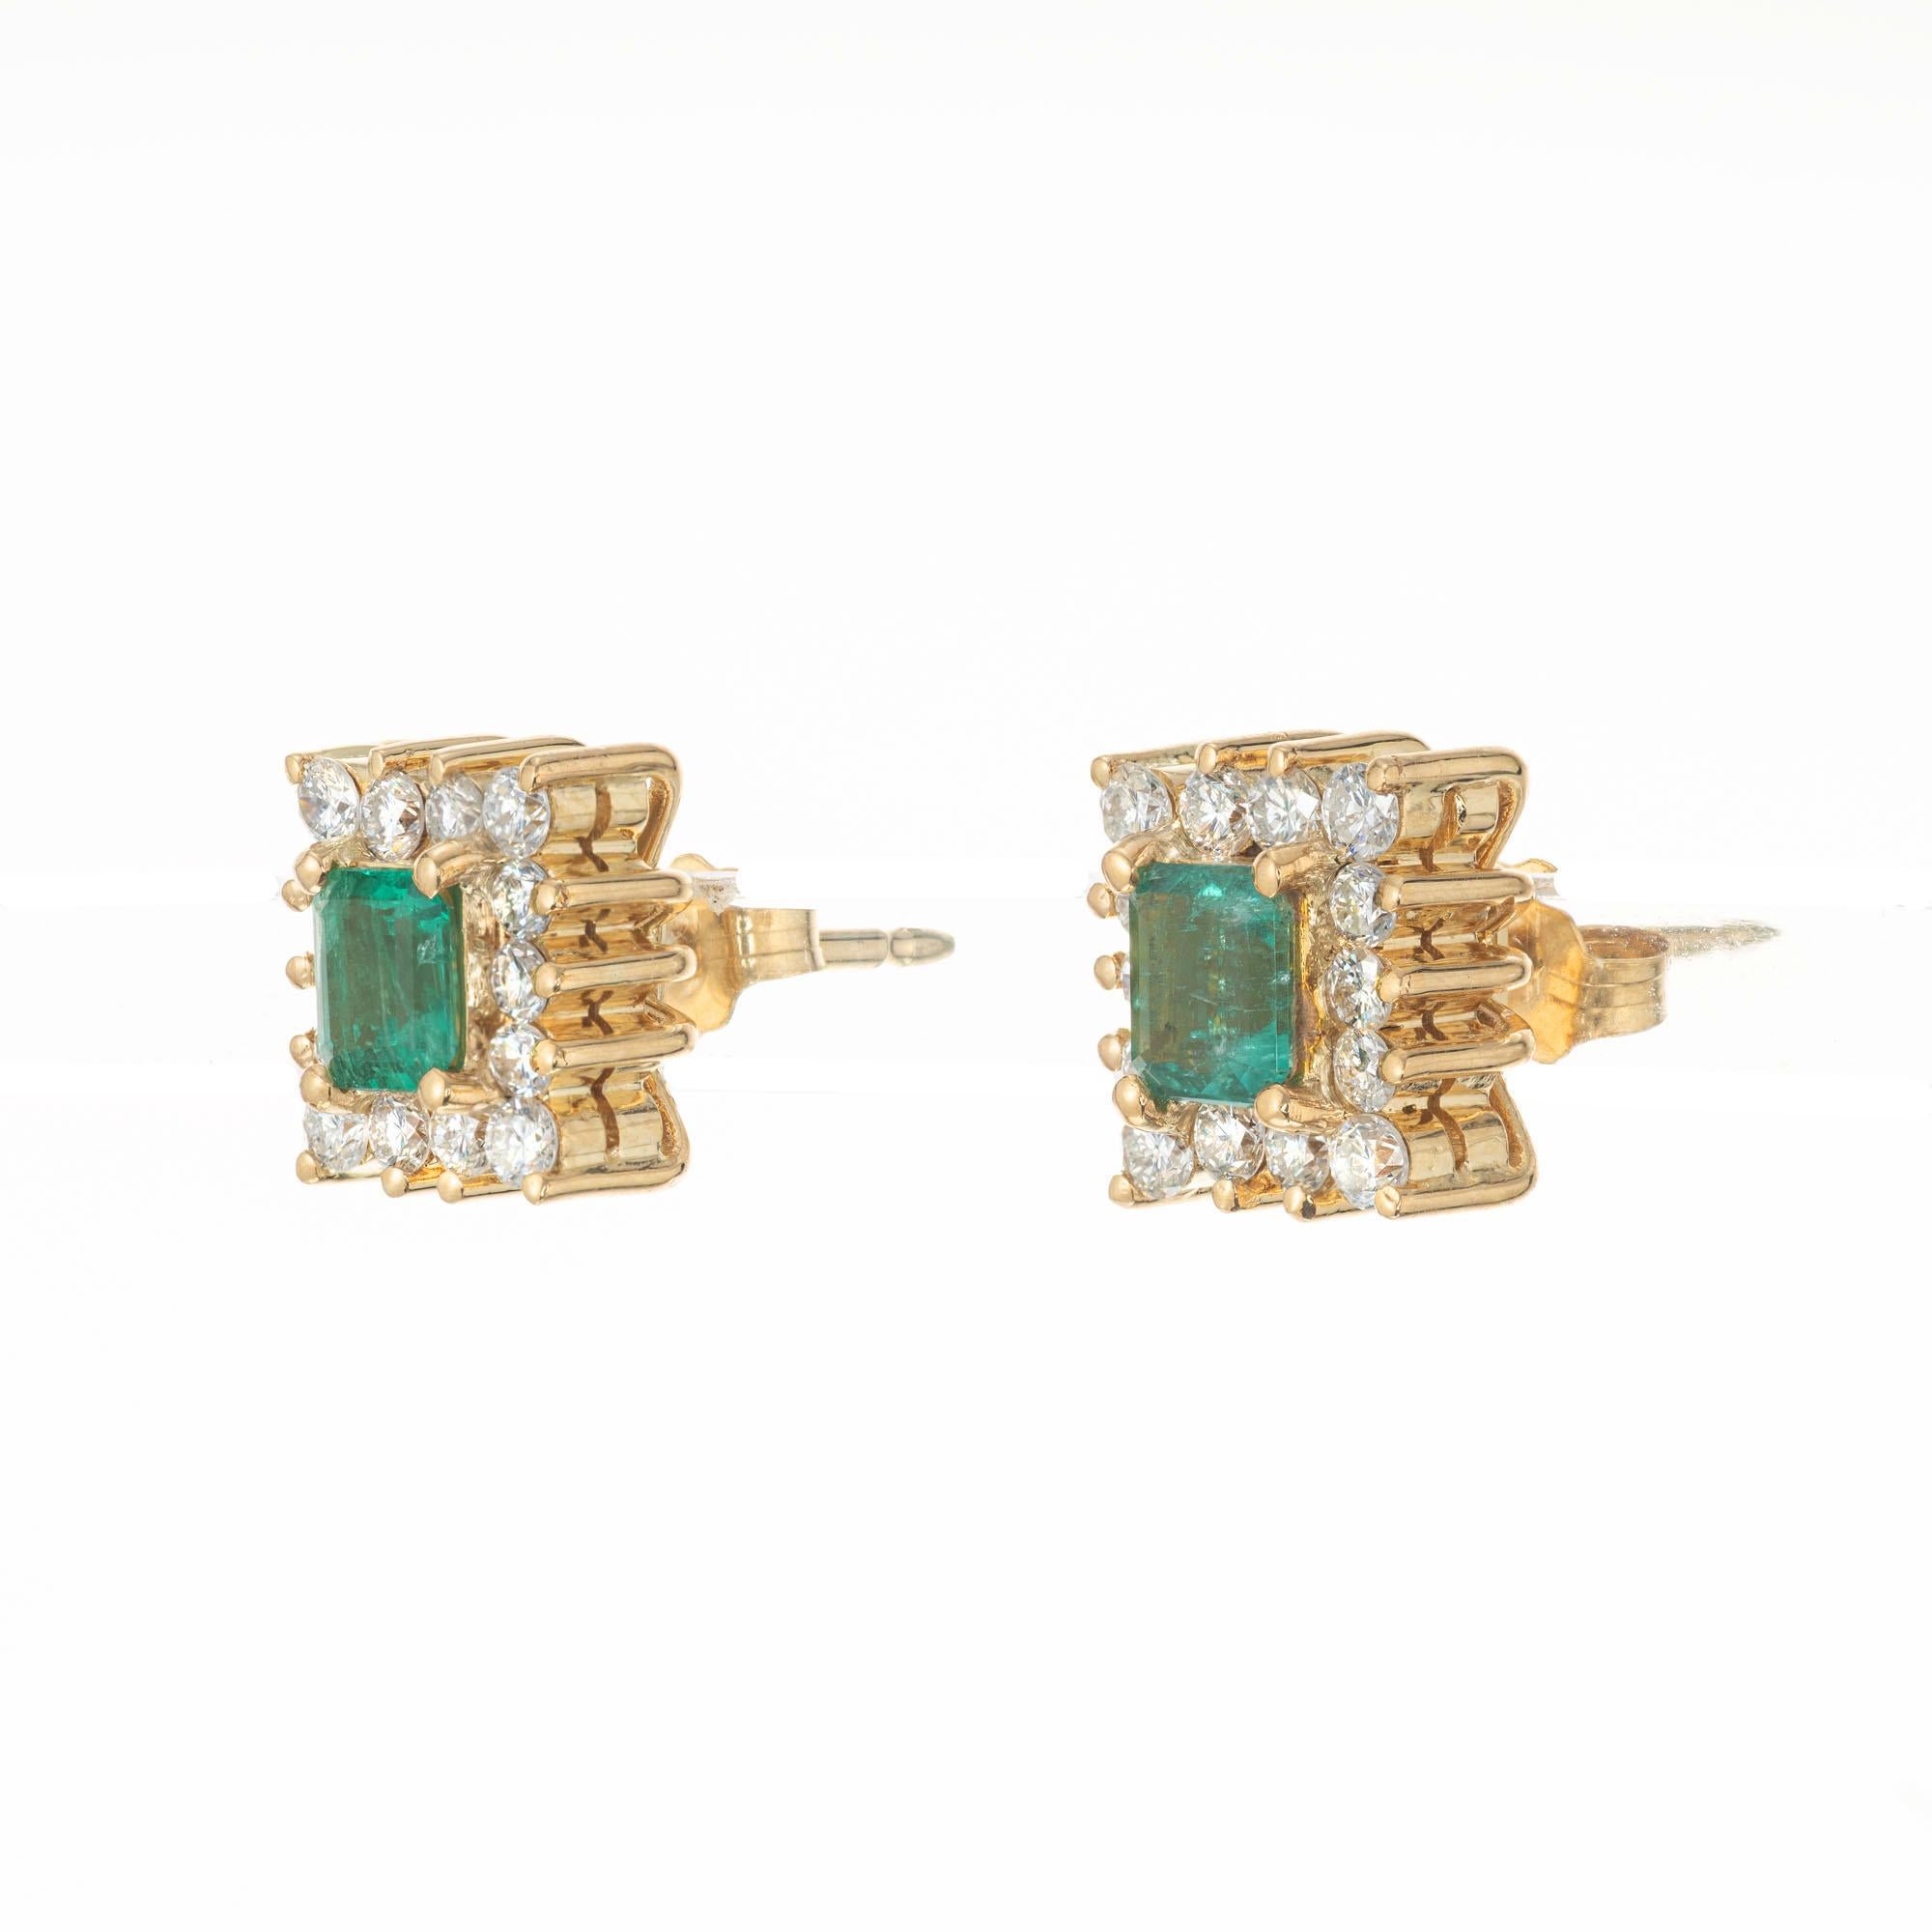 Emerald and diamond stud earrings. GIA Certified natural green emerald cut emeralds with a halo of 28 round brilliant cut diamonds in handmade 18k yellow gold settings. 

2 emerald cut green emeralds, I approx. .70cts
28 round brilliant cut